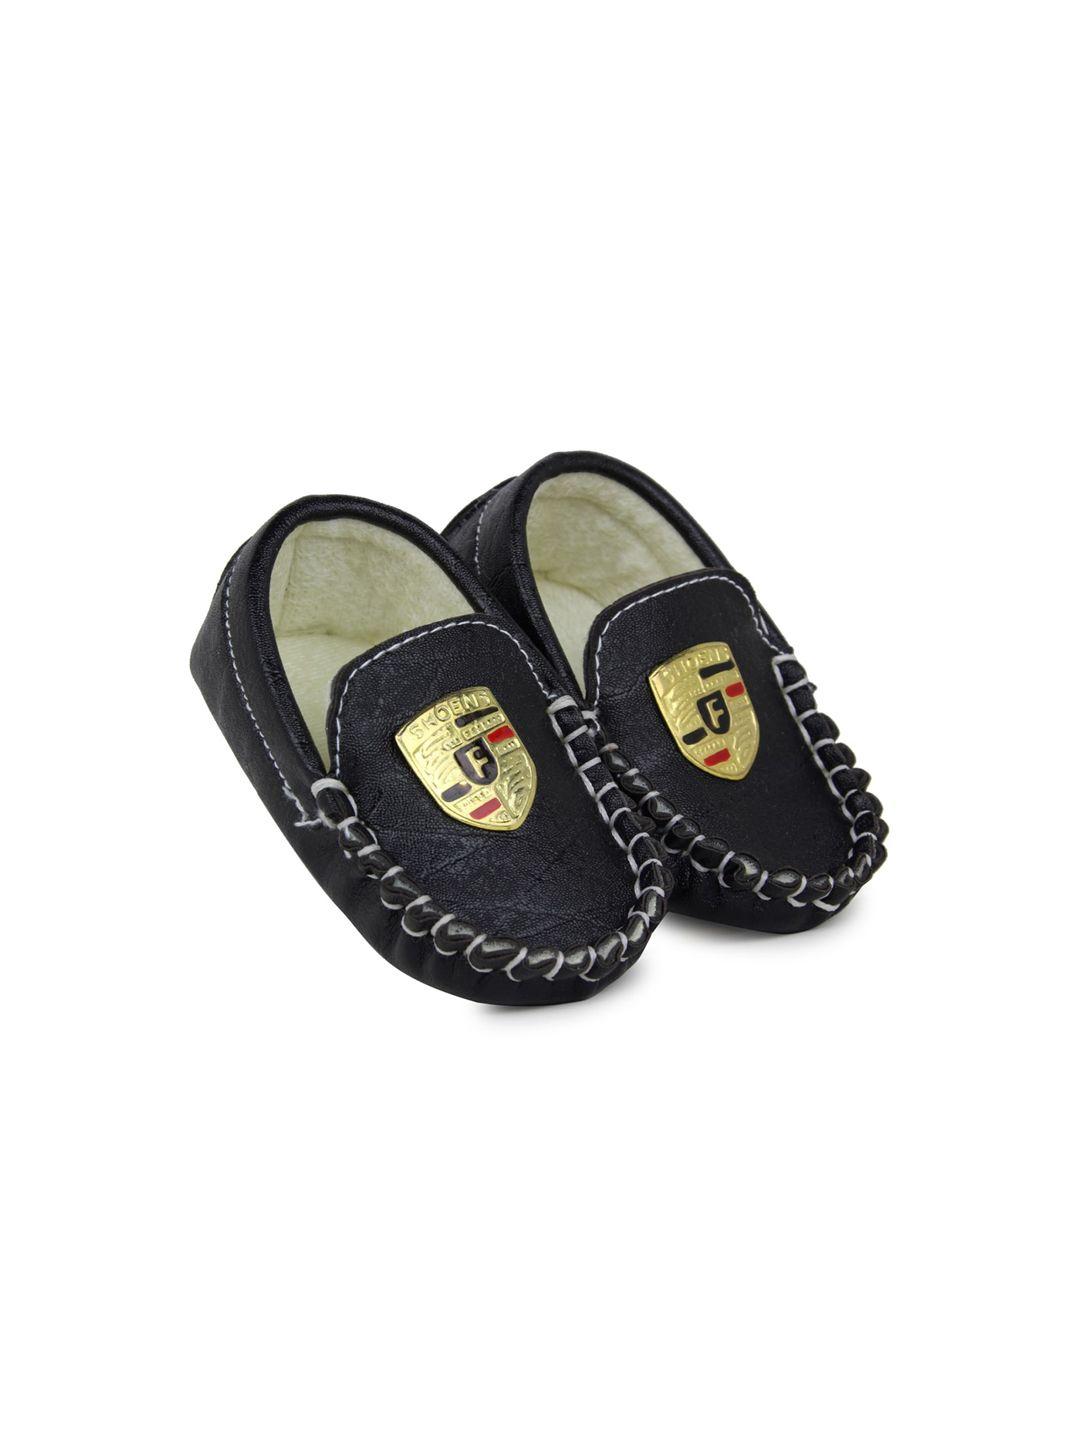 baesd infant boys self designed loafer booties